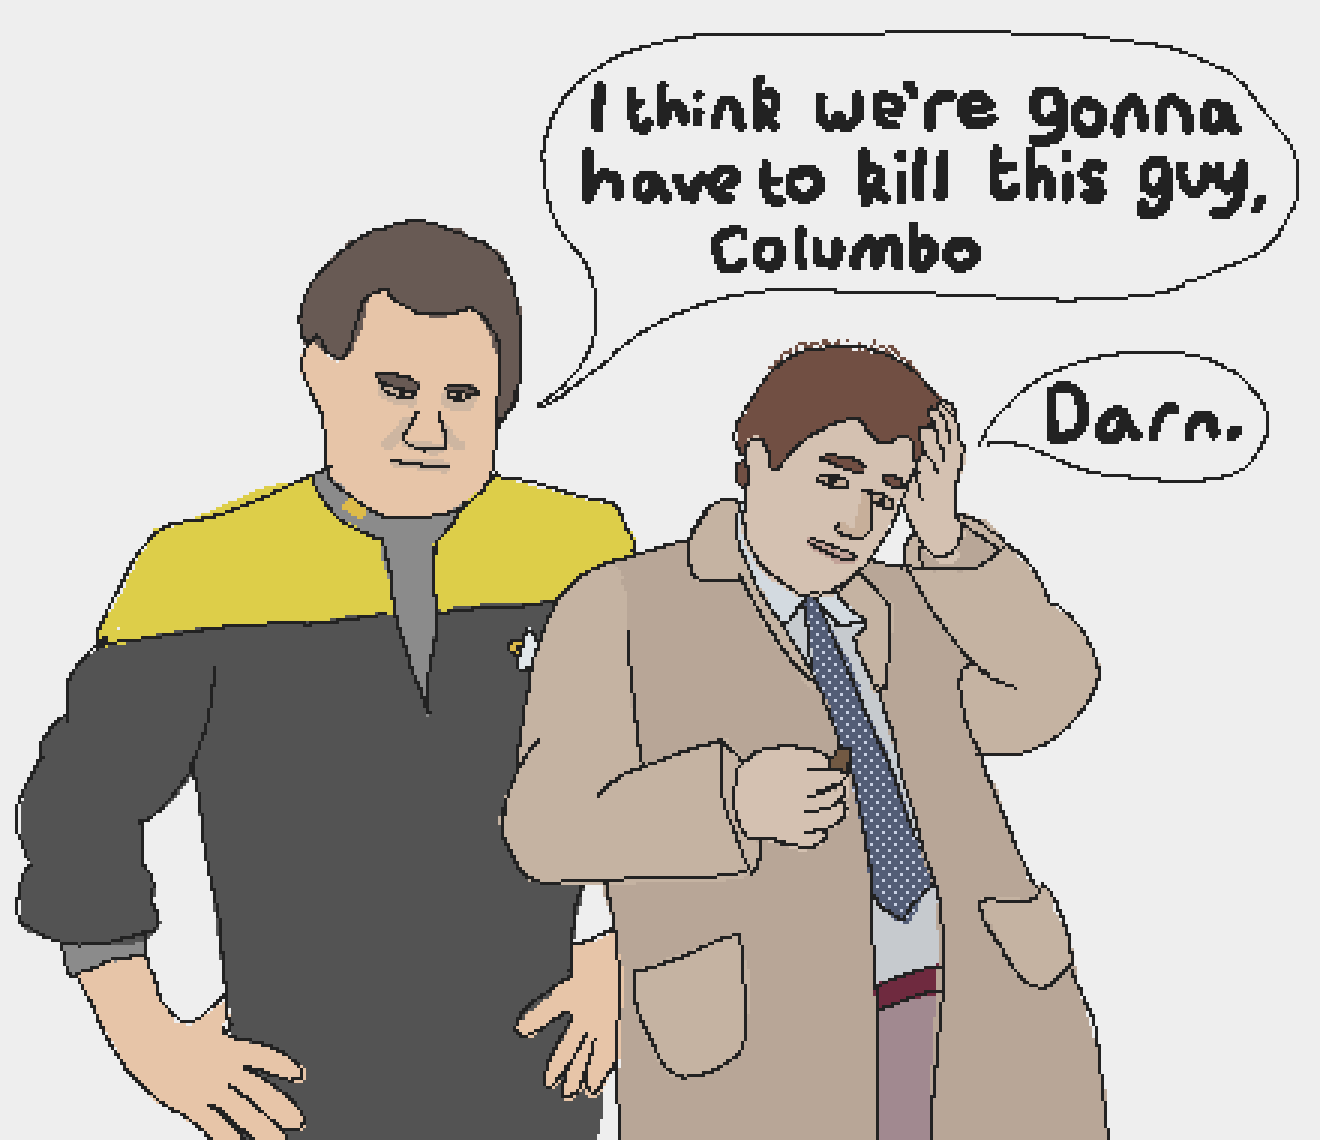 miles obrian from ds9 saying to lt. columbo from columbo 